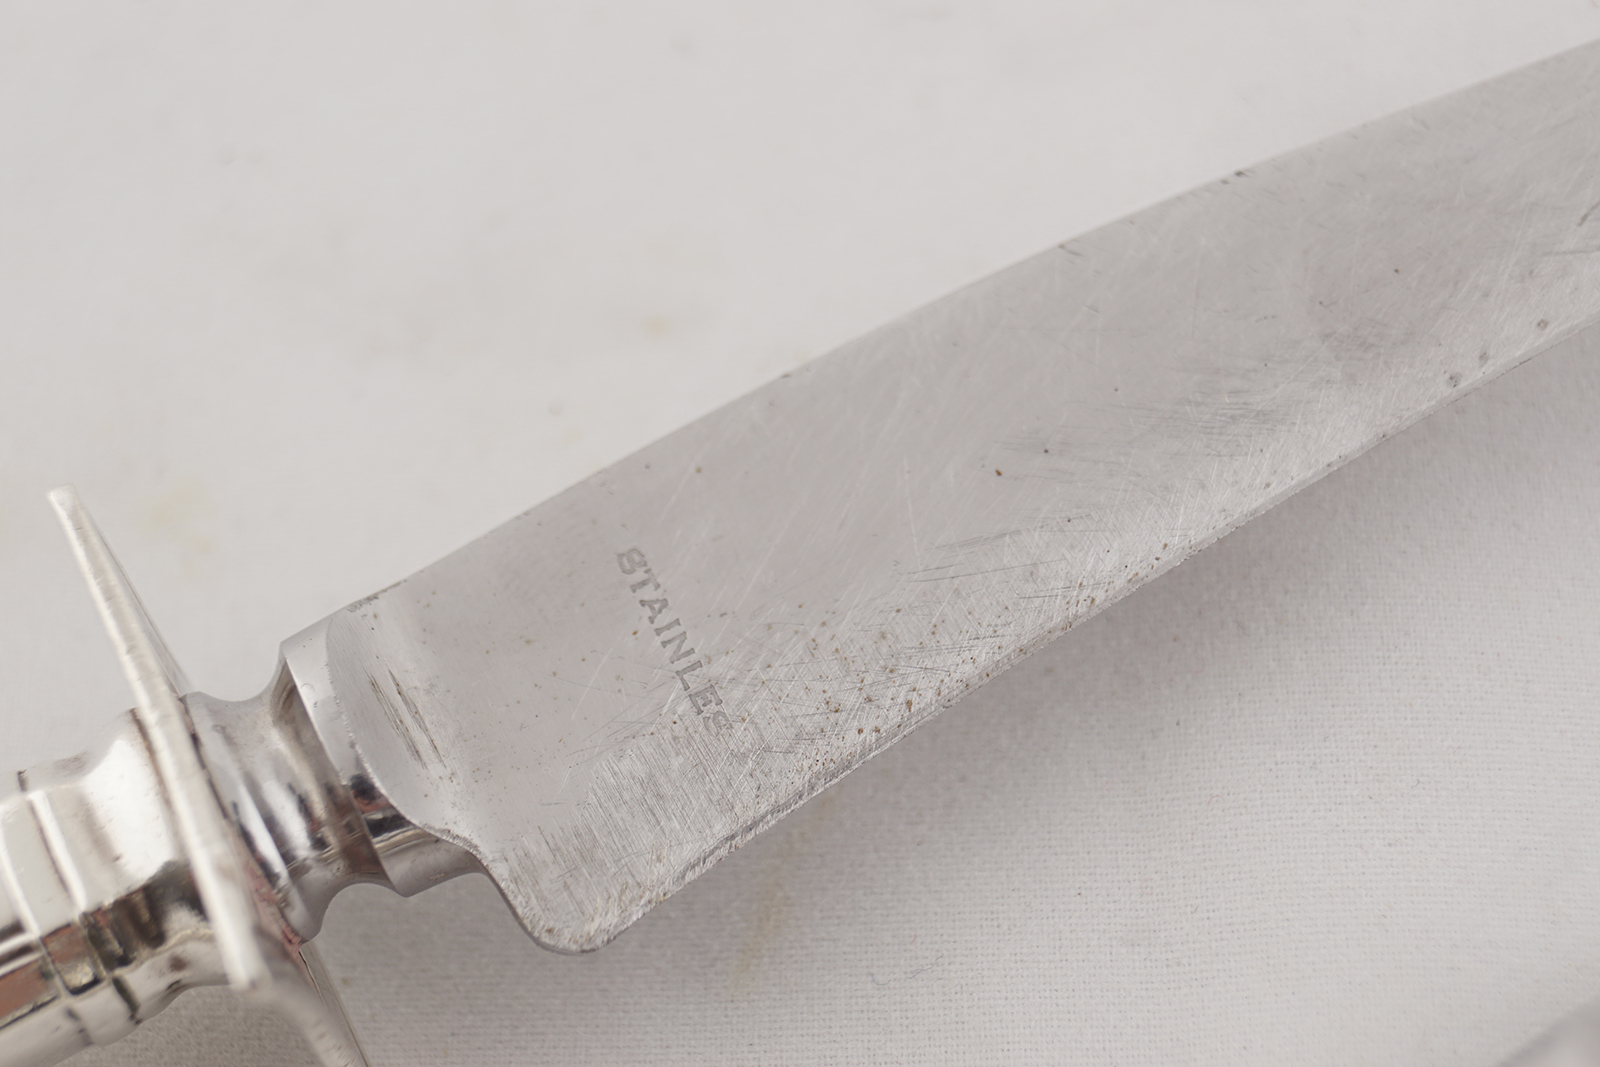 STERLING SILVER HANDLED CARVING KNIFE - Image 3 of 3